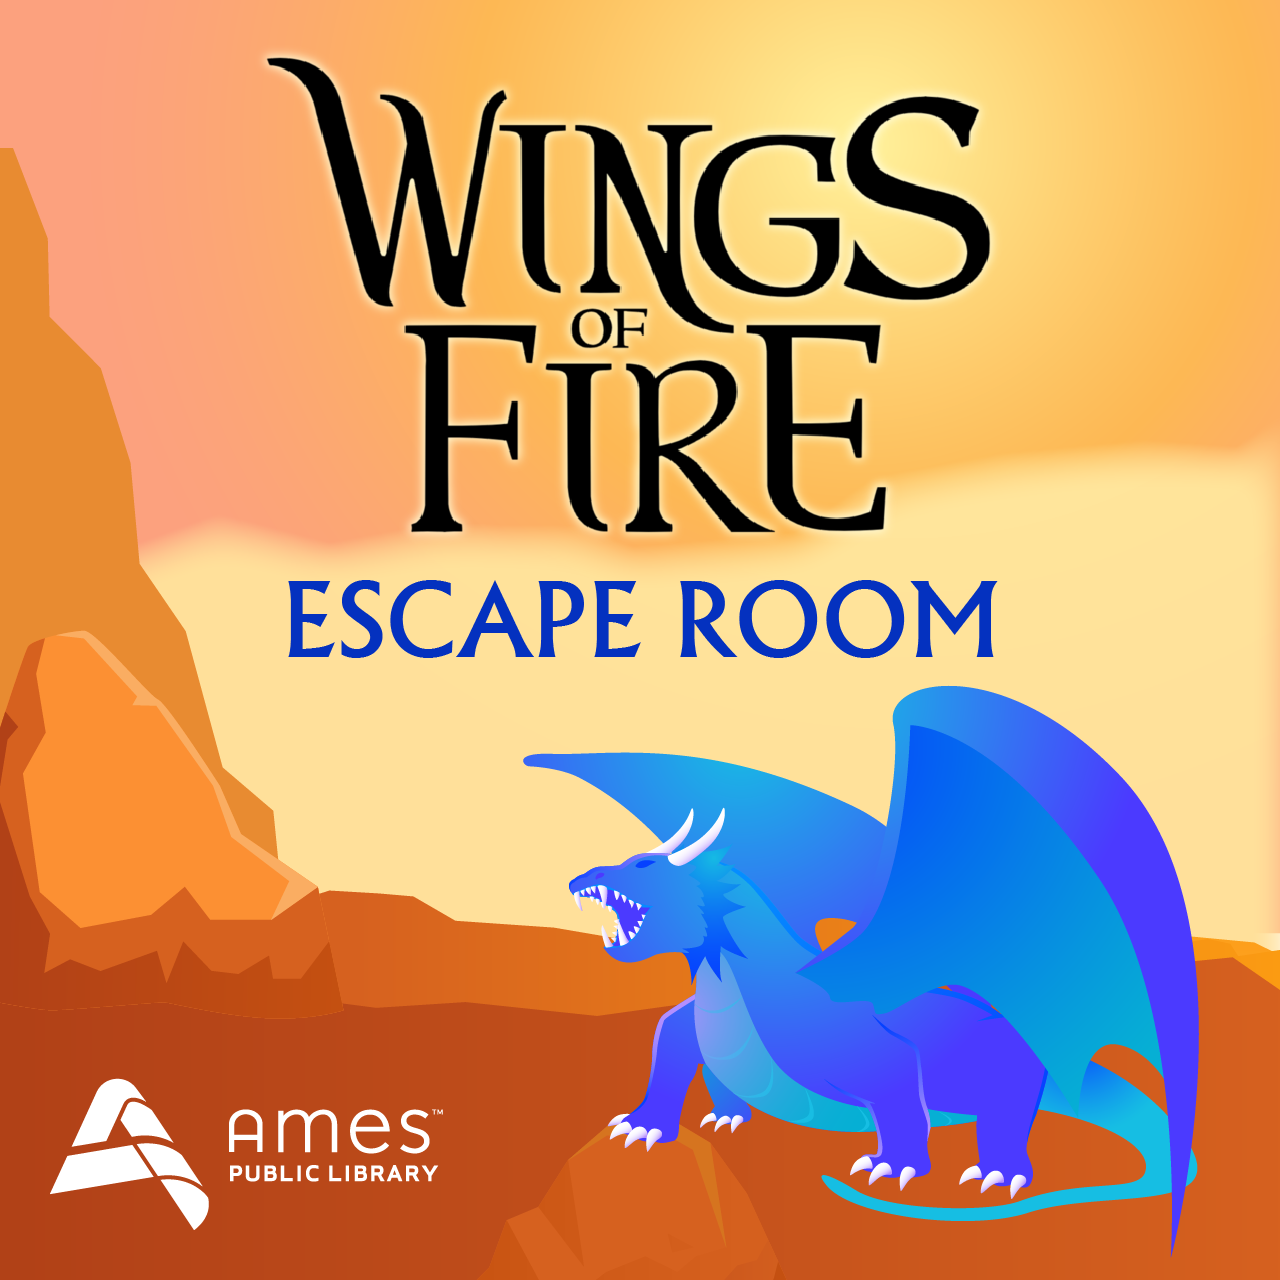 Wings of Fire Escape Room